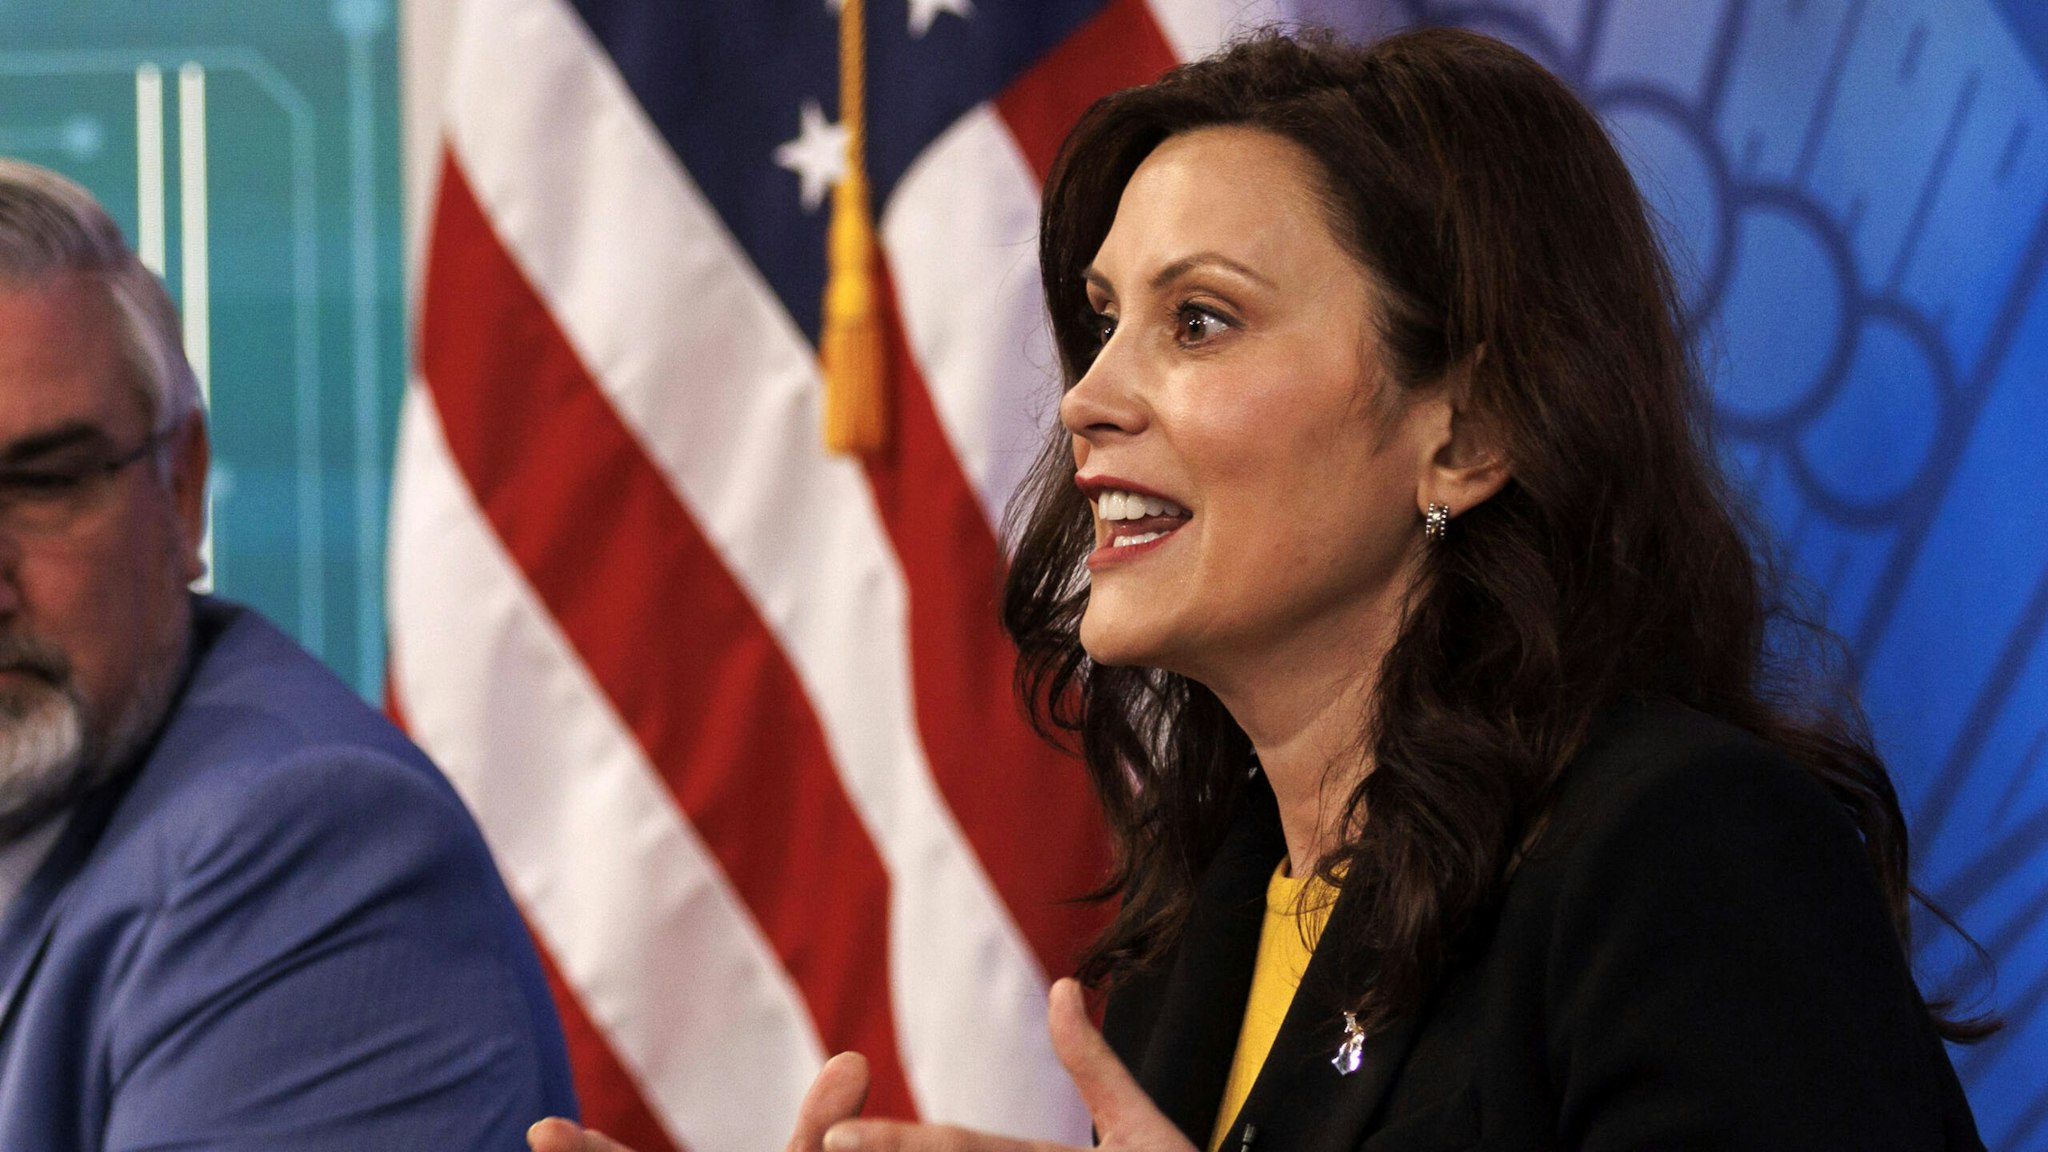 Gretchen Whitmer, governor of Michigan, right, speaks during a meeting with U.S. President Joe Biden, business leaders and governors in the Eisenhower Executive Office Building in Washington, D.C., U.S., on Wednesday, March 9, 2022. The Biden administration's long-awaited executive order for government agencies to take a closer look at issues surrounding the crypto market is being celebrated by industry participants despite it lacking a clear path on possible regulation.